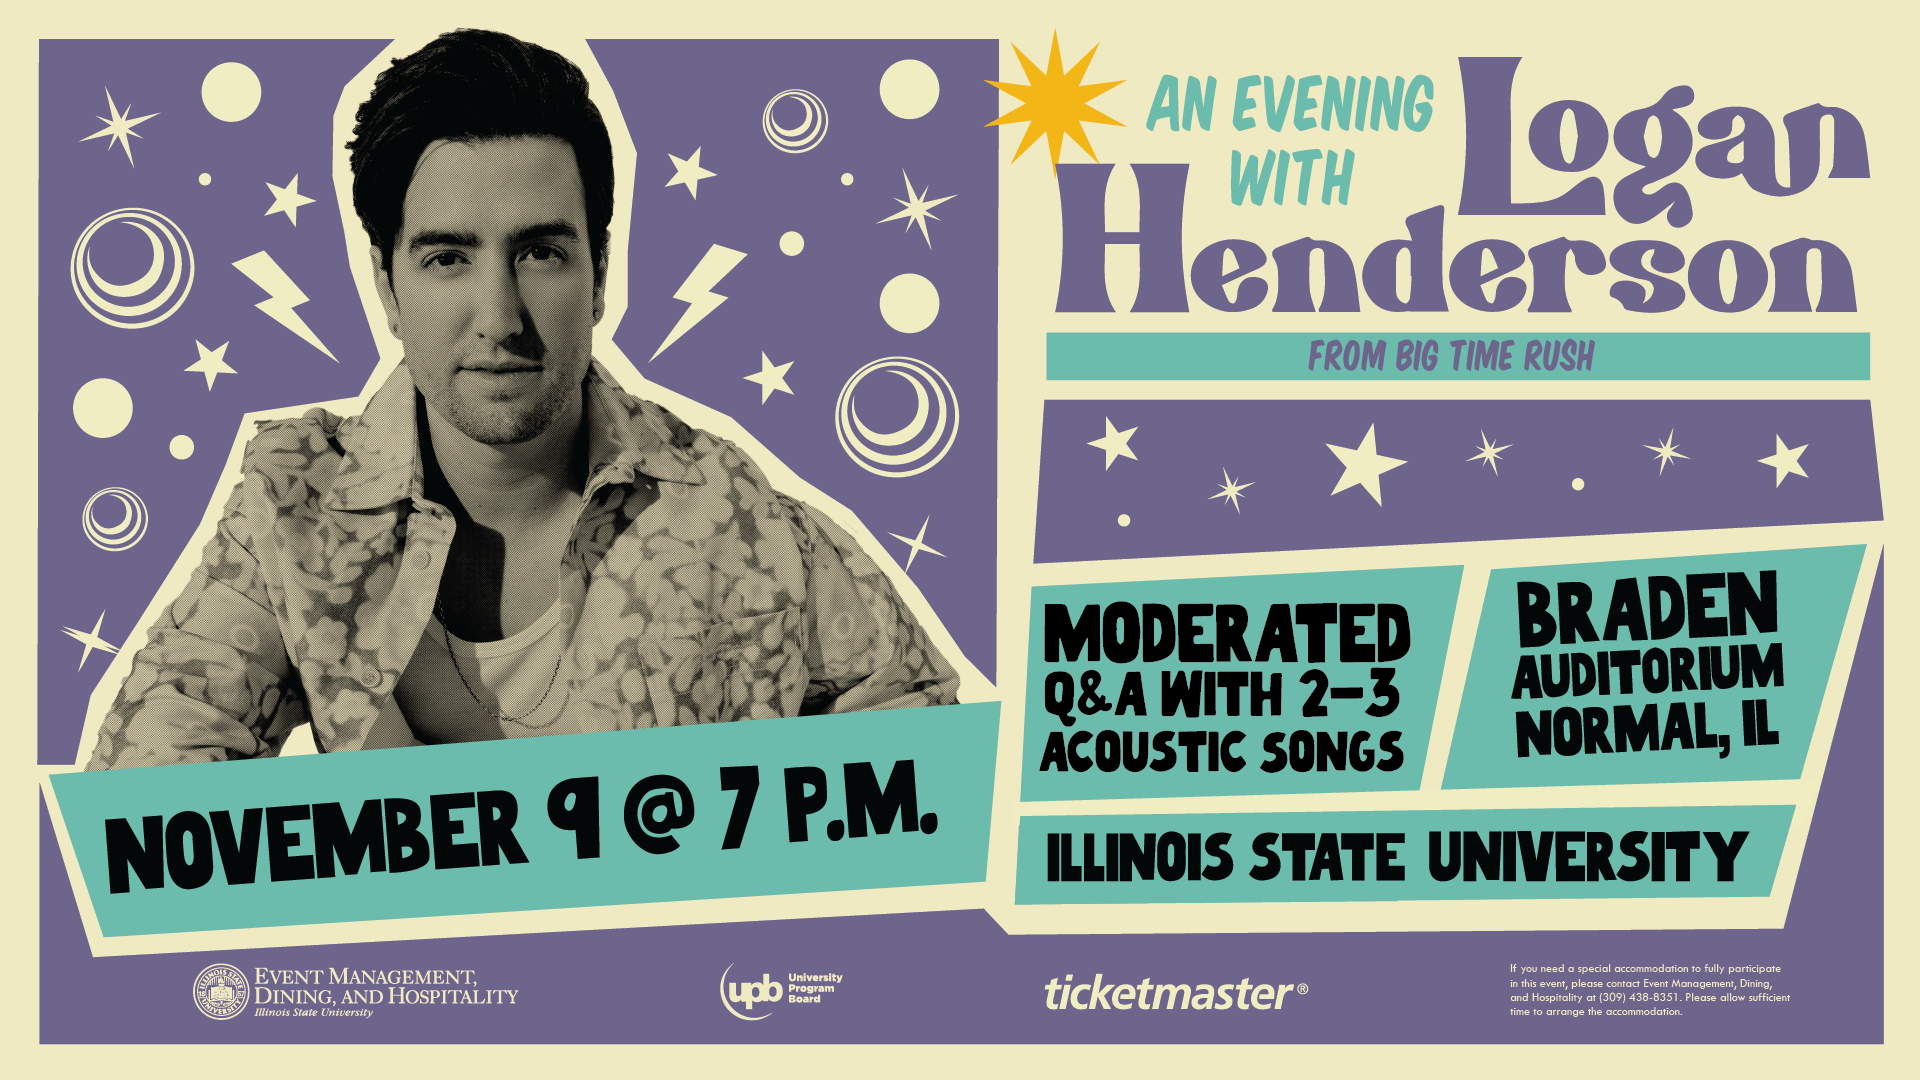 An Evening with Logan Henderson from Big Time Rush: Illinois State University